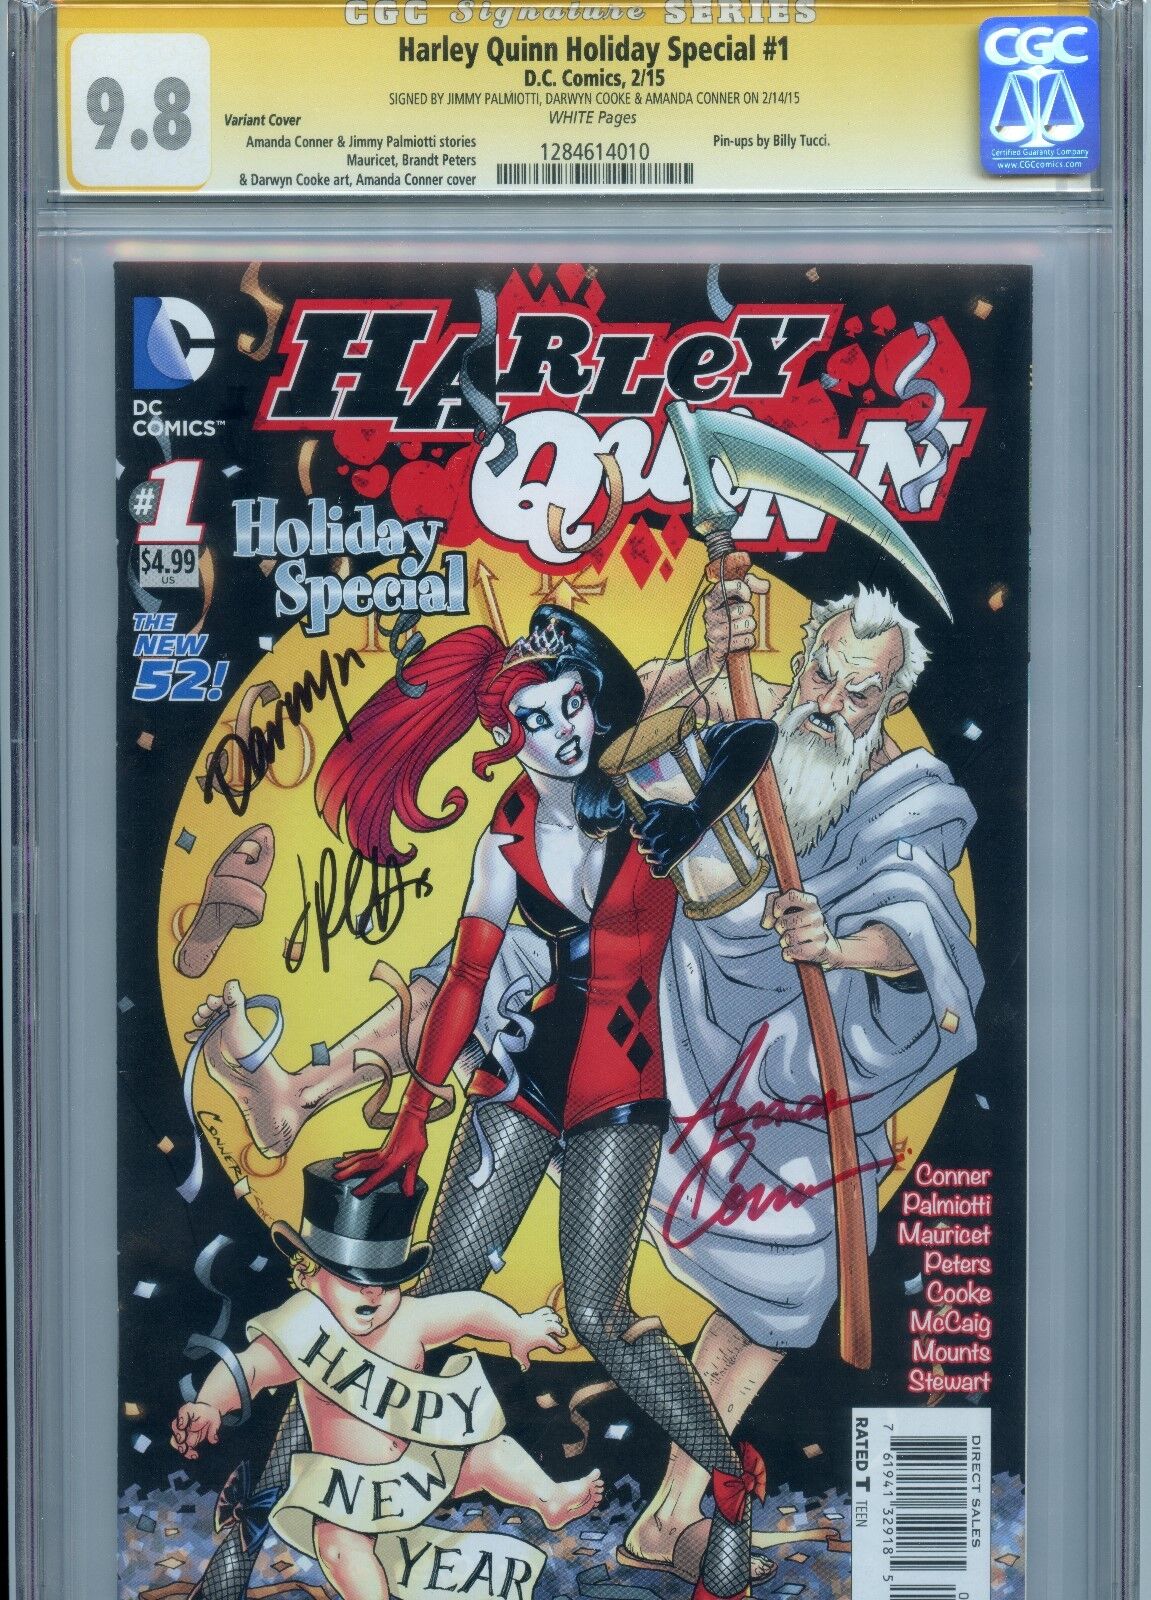 HARLEY QUINN HOLIDAY SPECIAL #1 NEW YEARS EVE VARIANT EDITION CGC 9.8 SS RARE